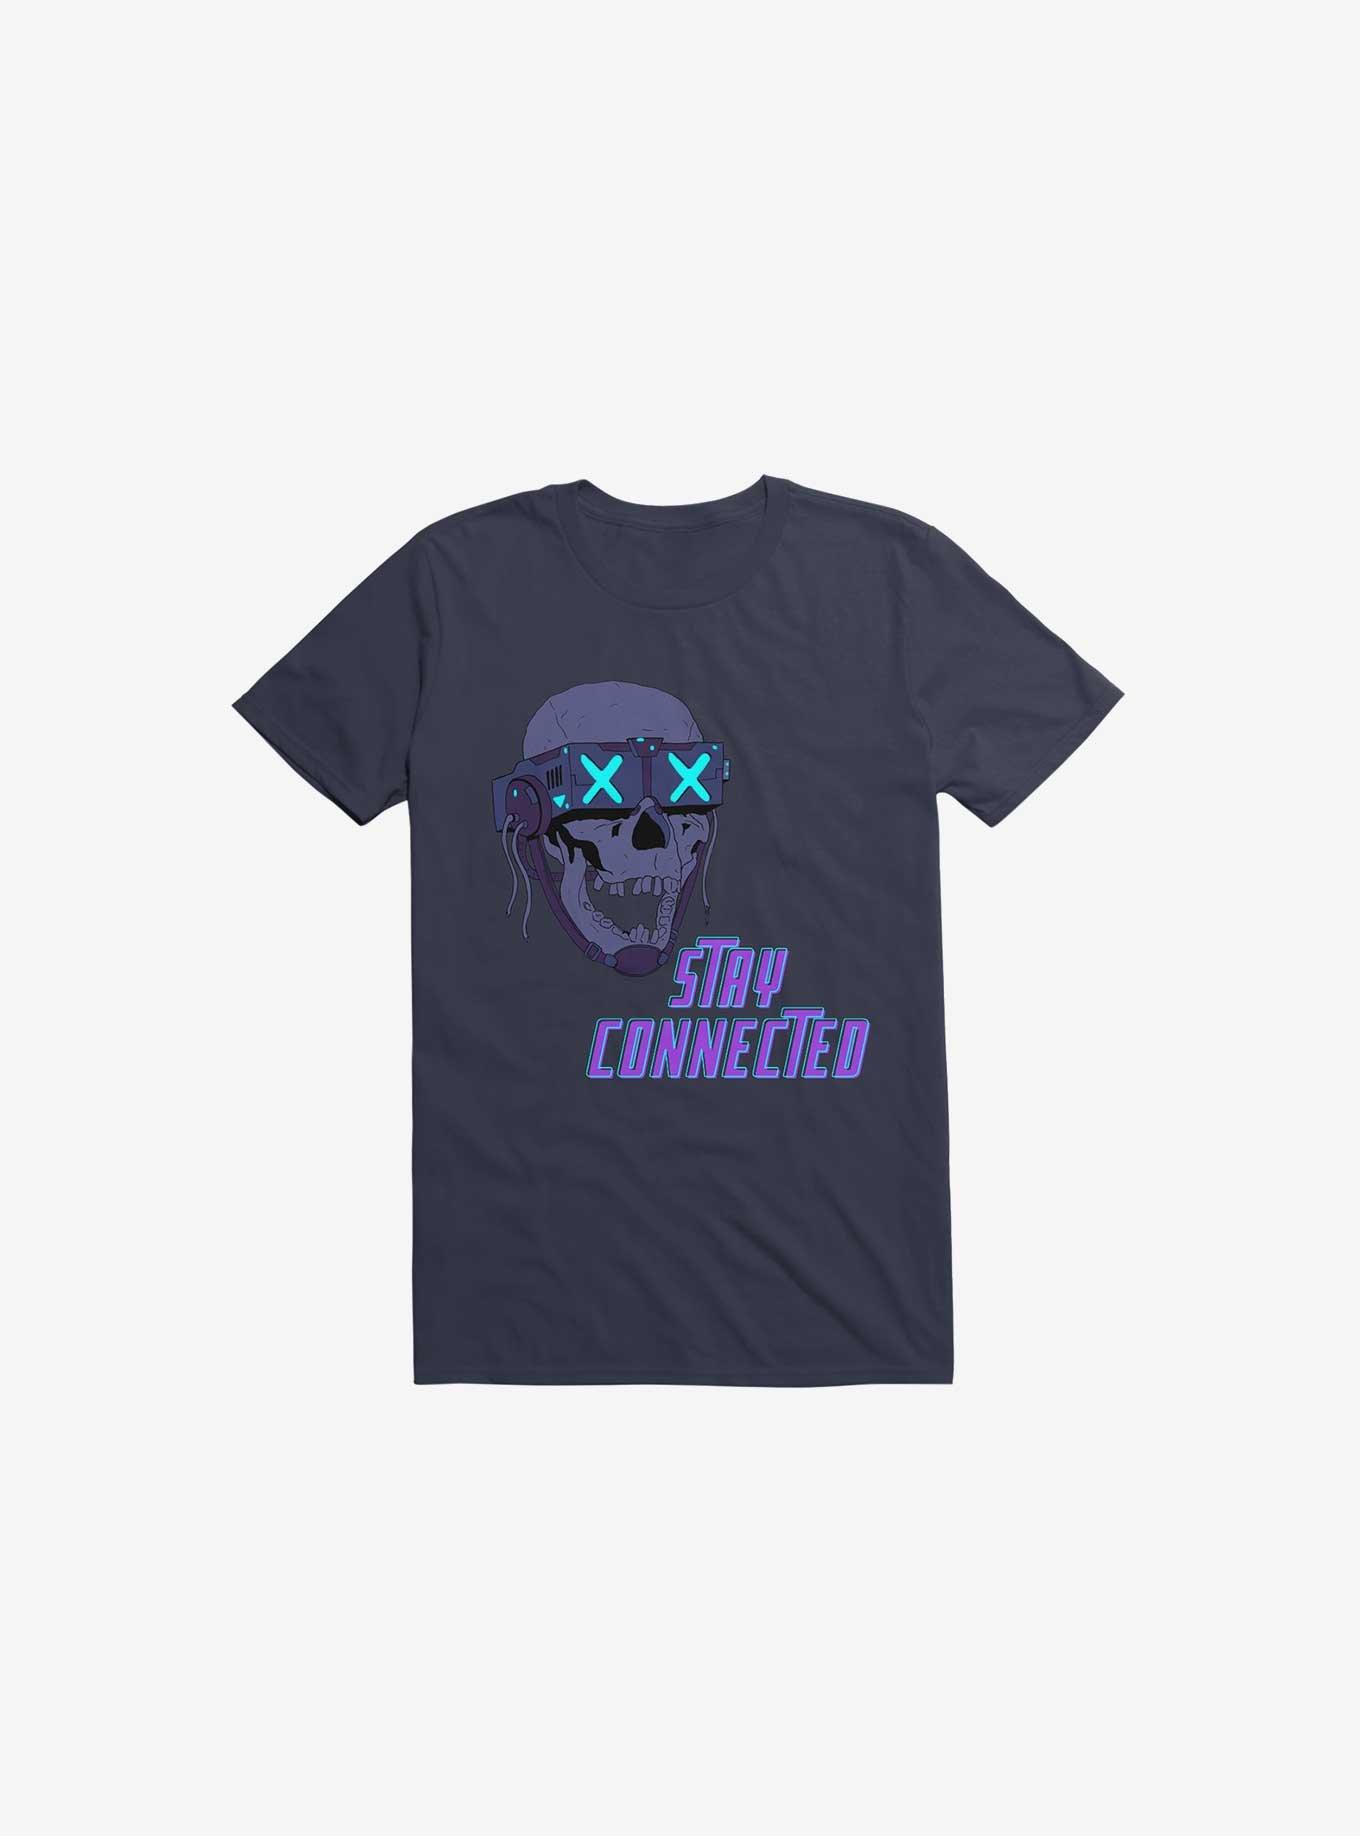 Stay_Connected 2.0 Navy Blue T-Shirt, , hi-res